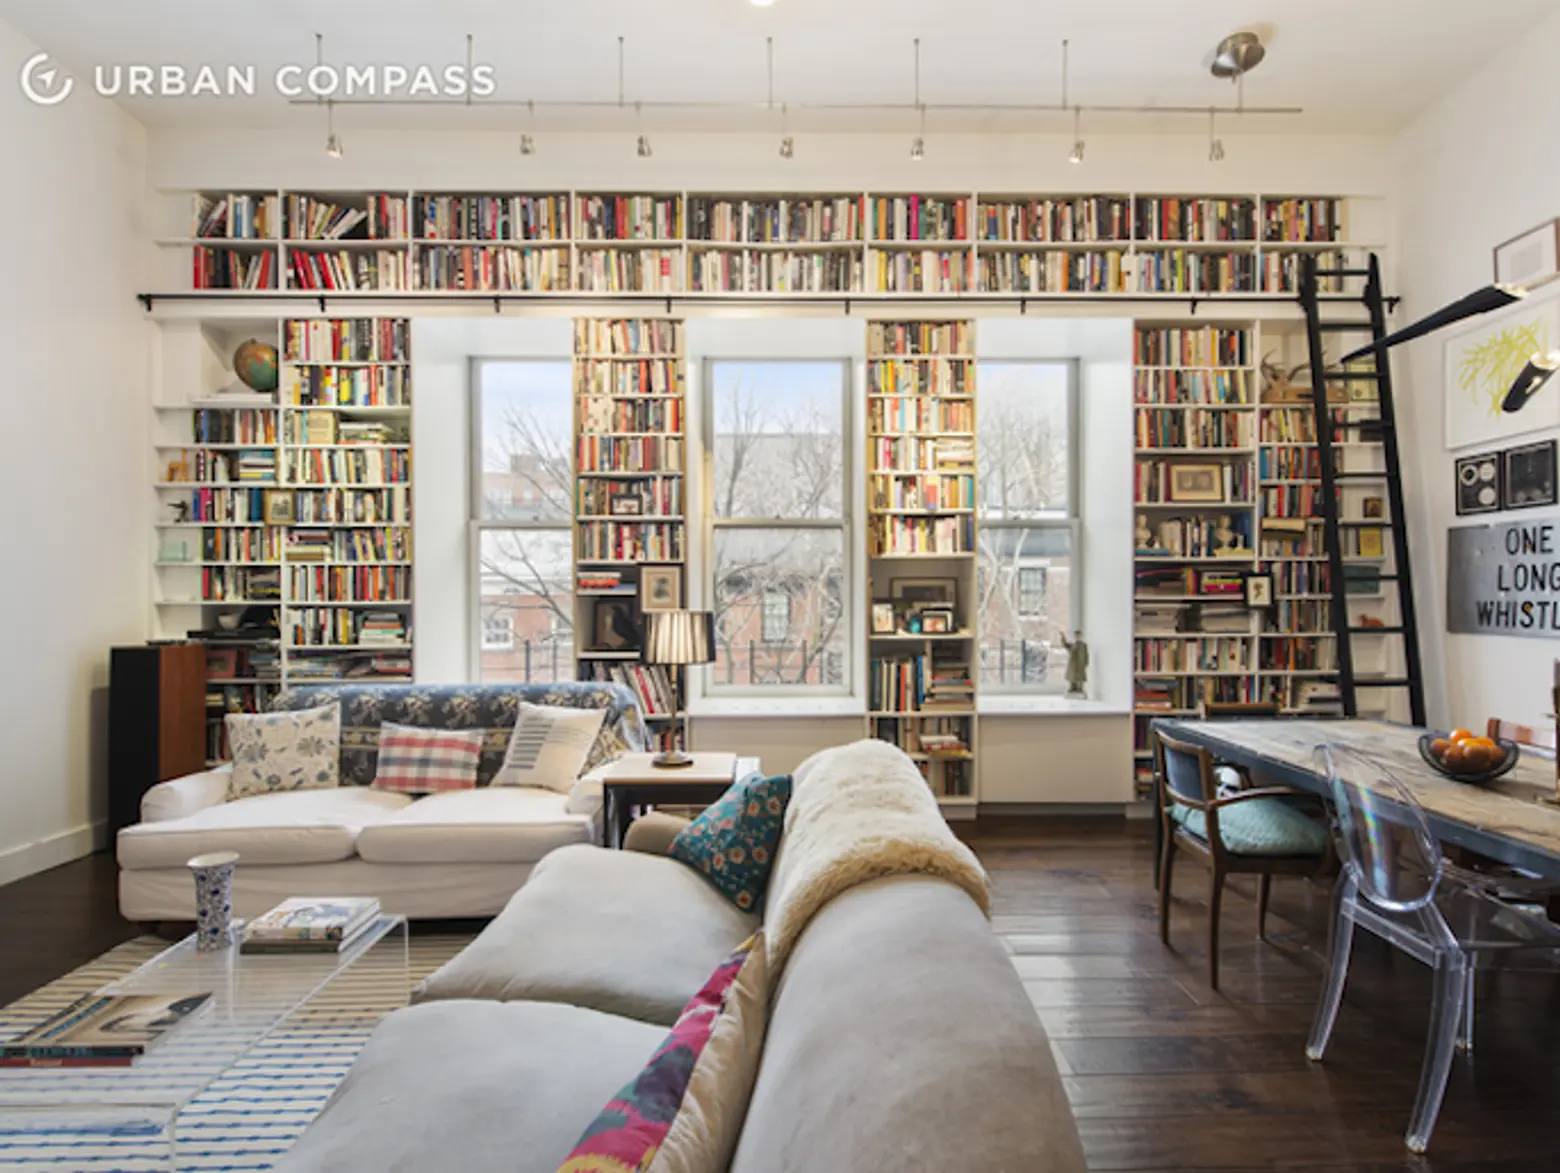 Enjoy the Ultimate Brooklyn Loft Experience in This $2.3M Ensemble Architects-Designed Duplex